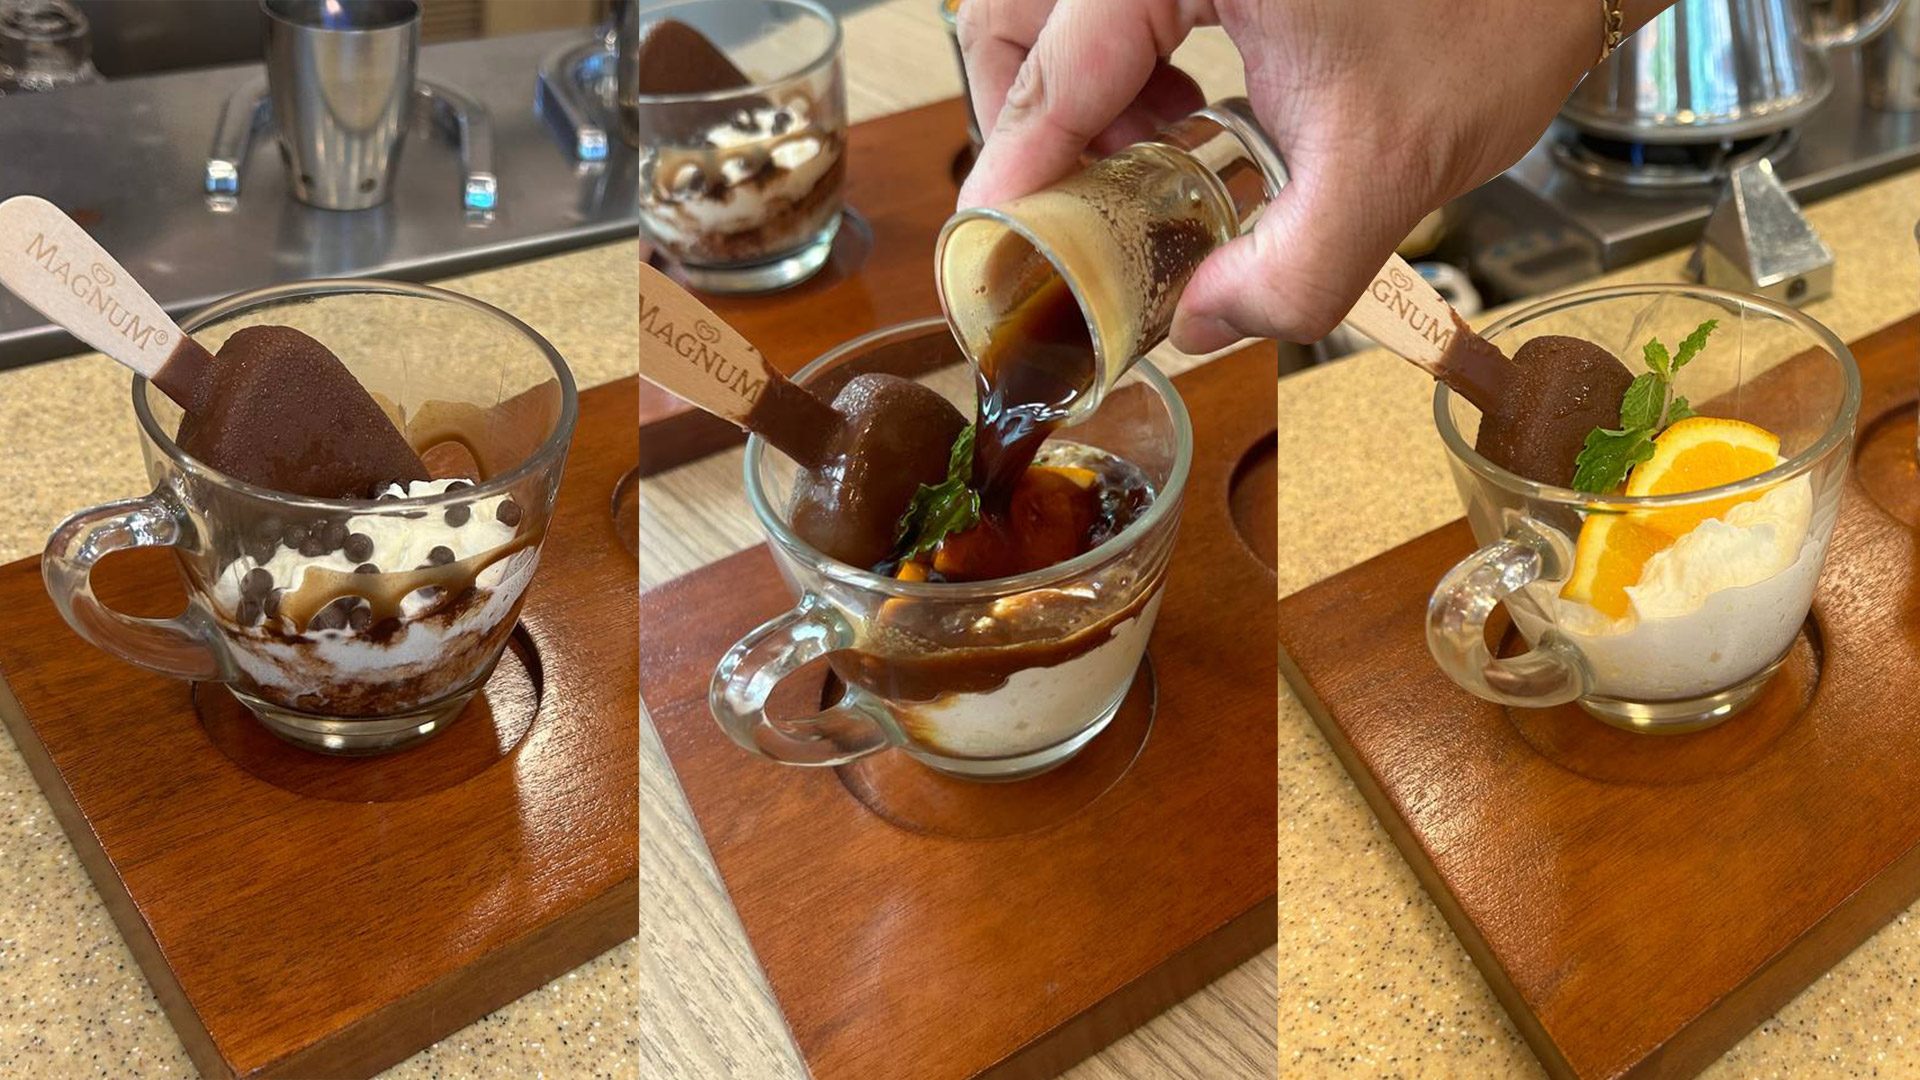 LOOK: Trying out UCC Café’s affogato desserts using Magnum Ice Cream